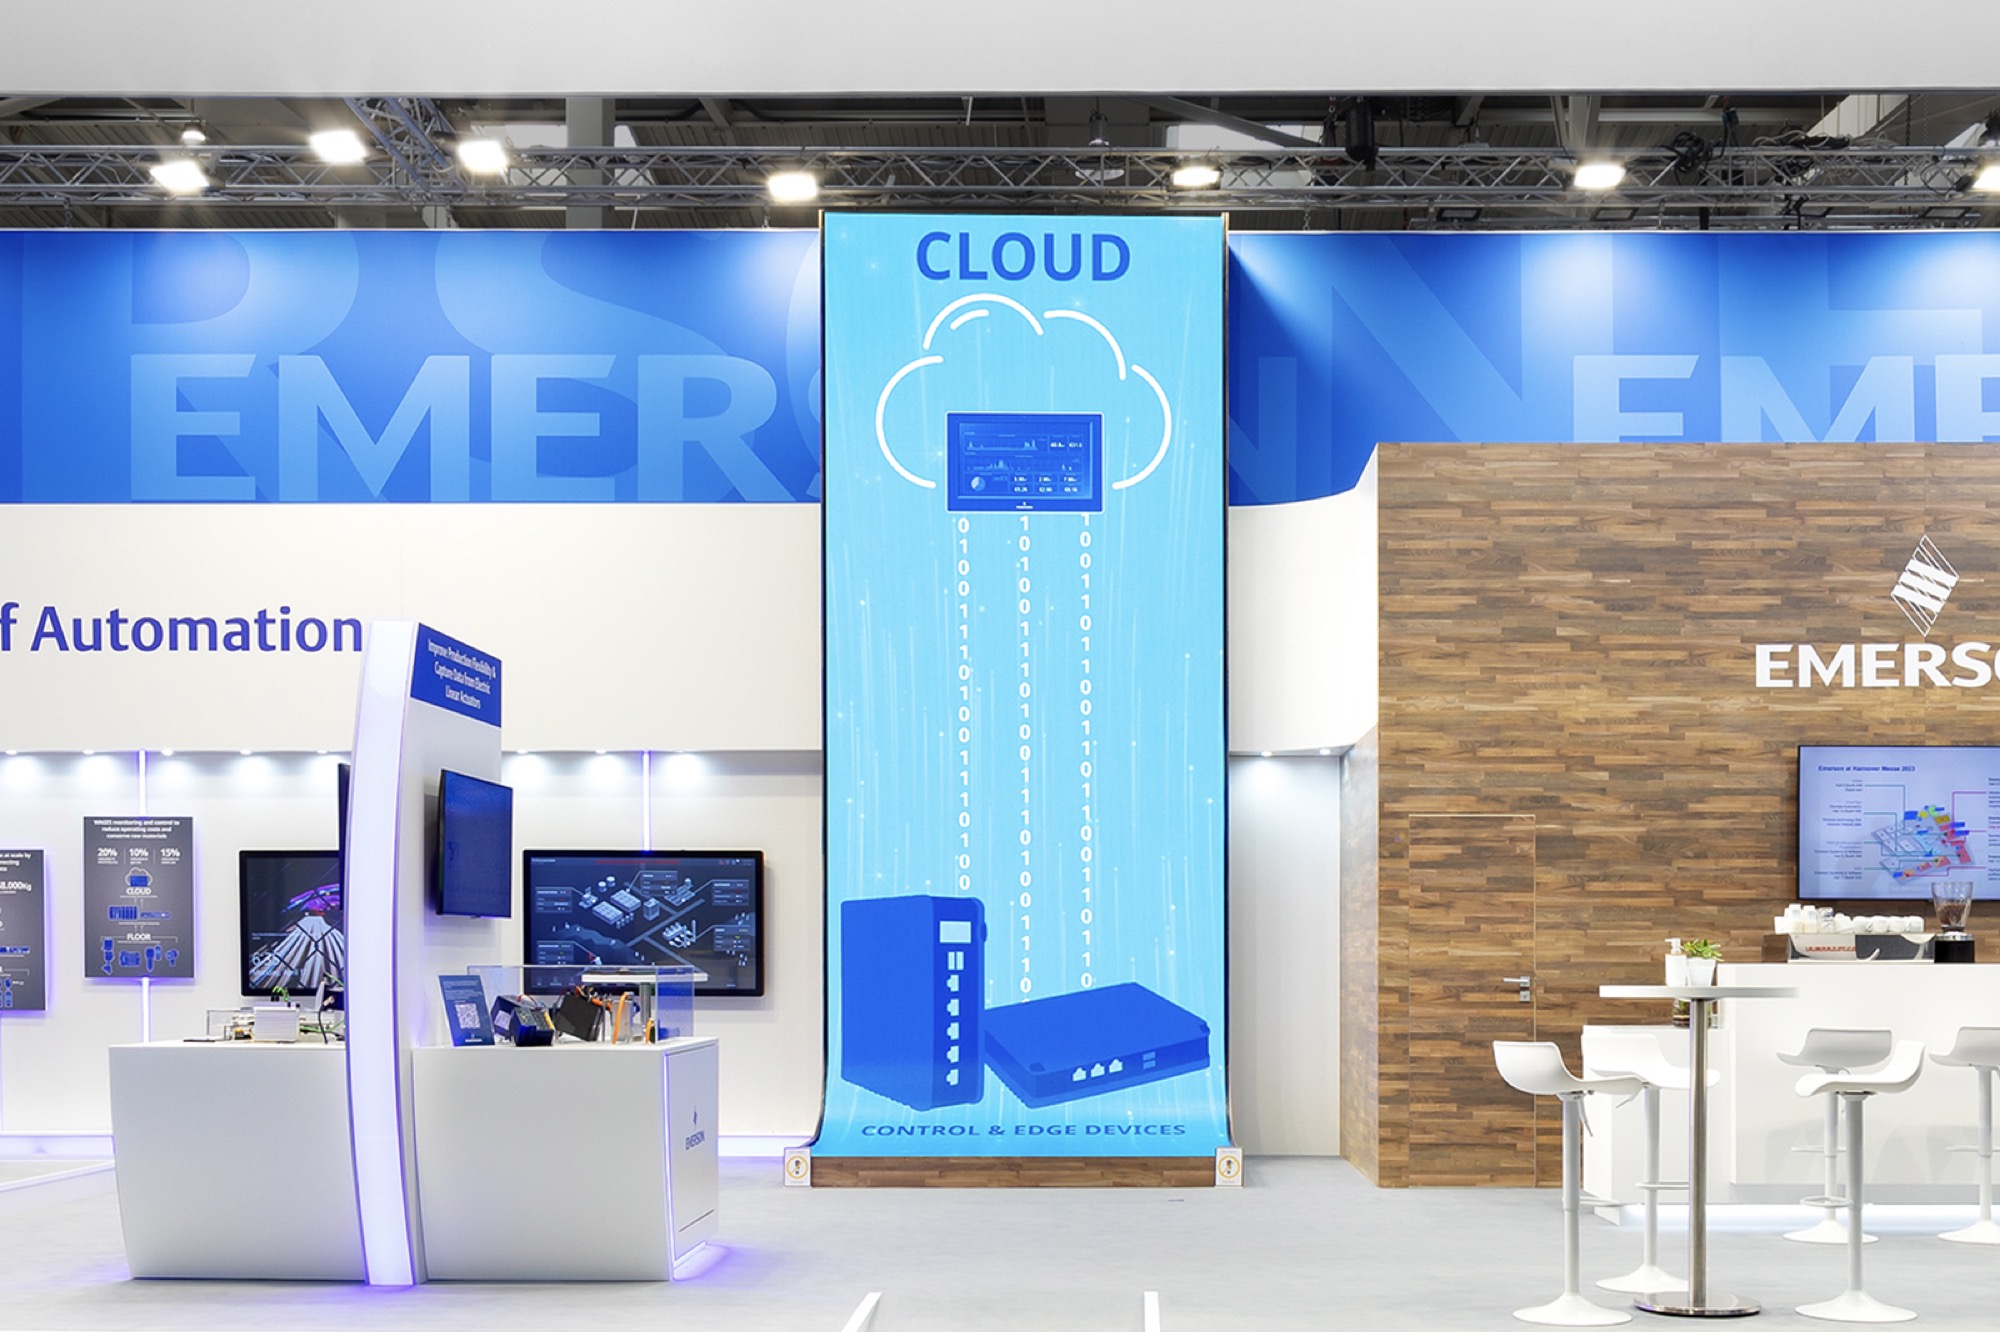 Cloud storage display in the Emerson booth at a convention